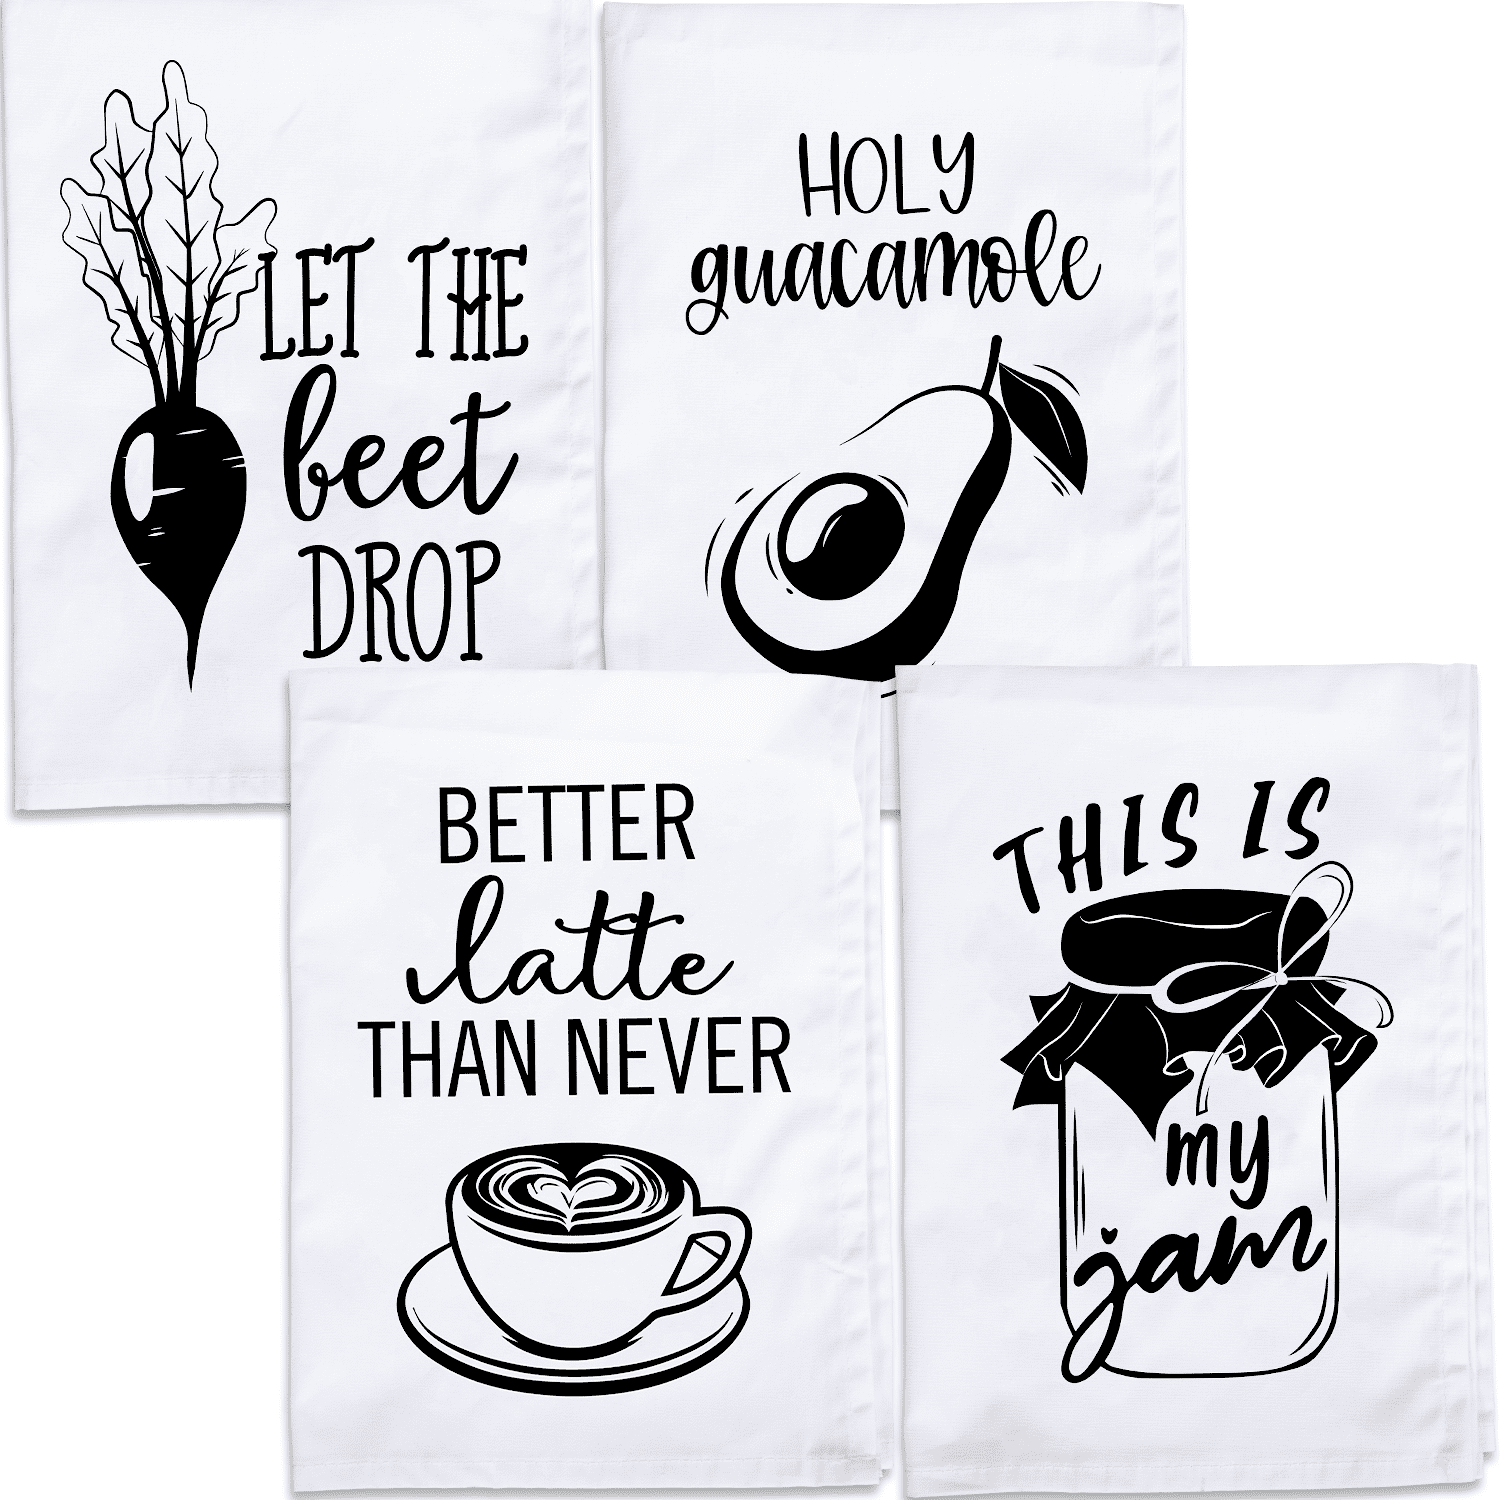 New Home Gifts for Home, Housewarming Gifts New Home, Funny Dish Towels,  Housewarming Gifts for Women, House Warming Presents for Women, Funny  Kitchen Towels, House Warming Presents for New Home 